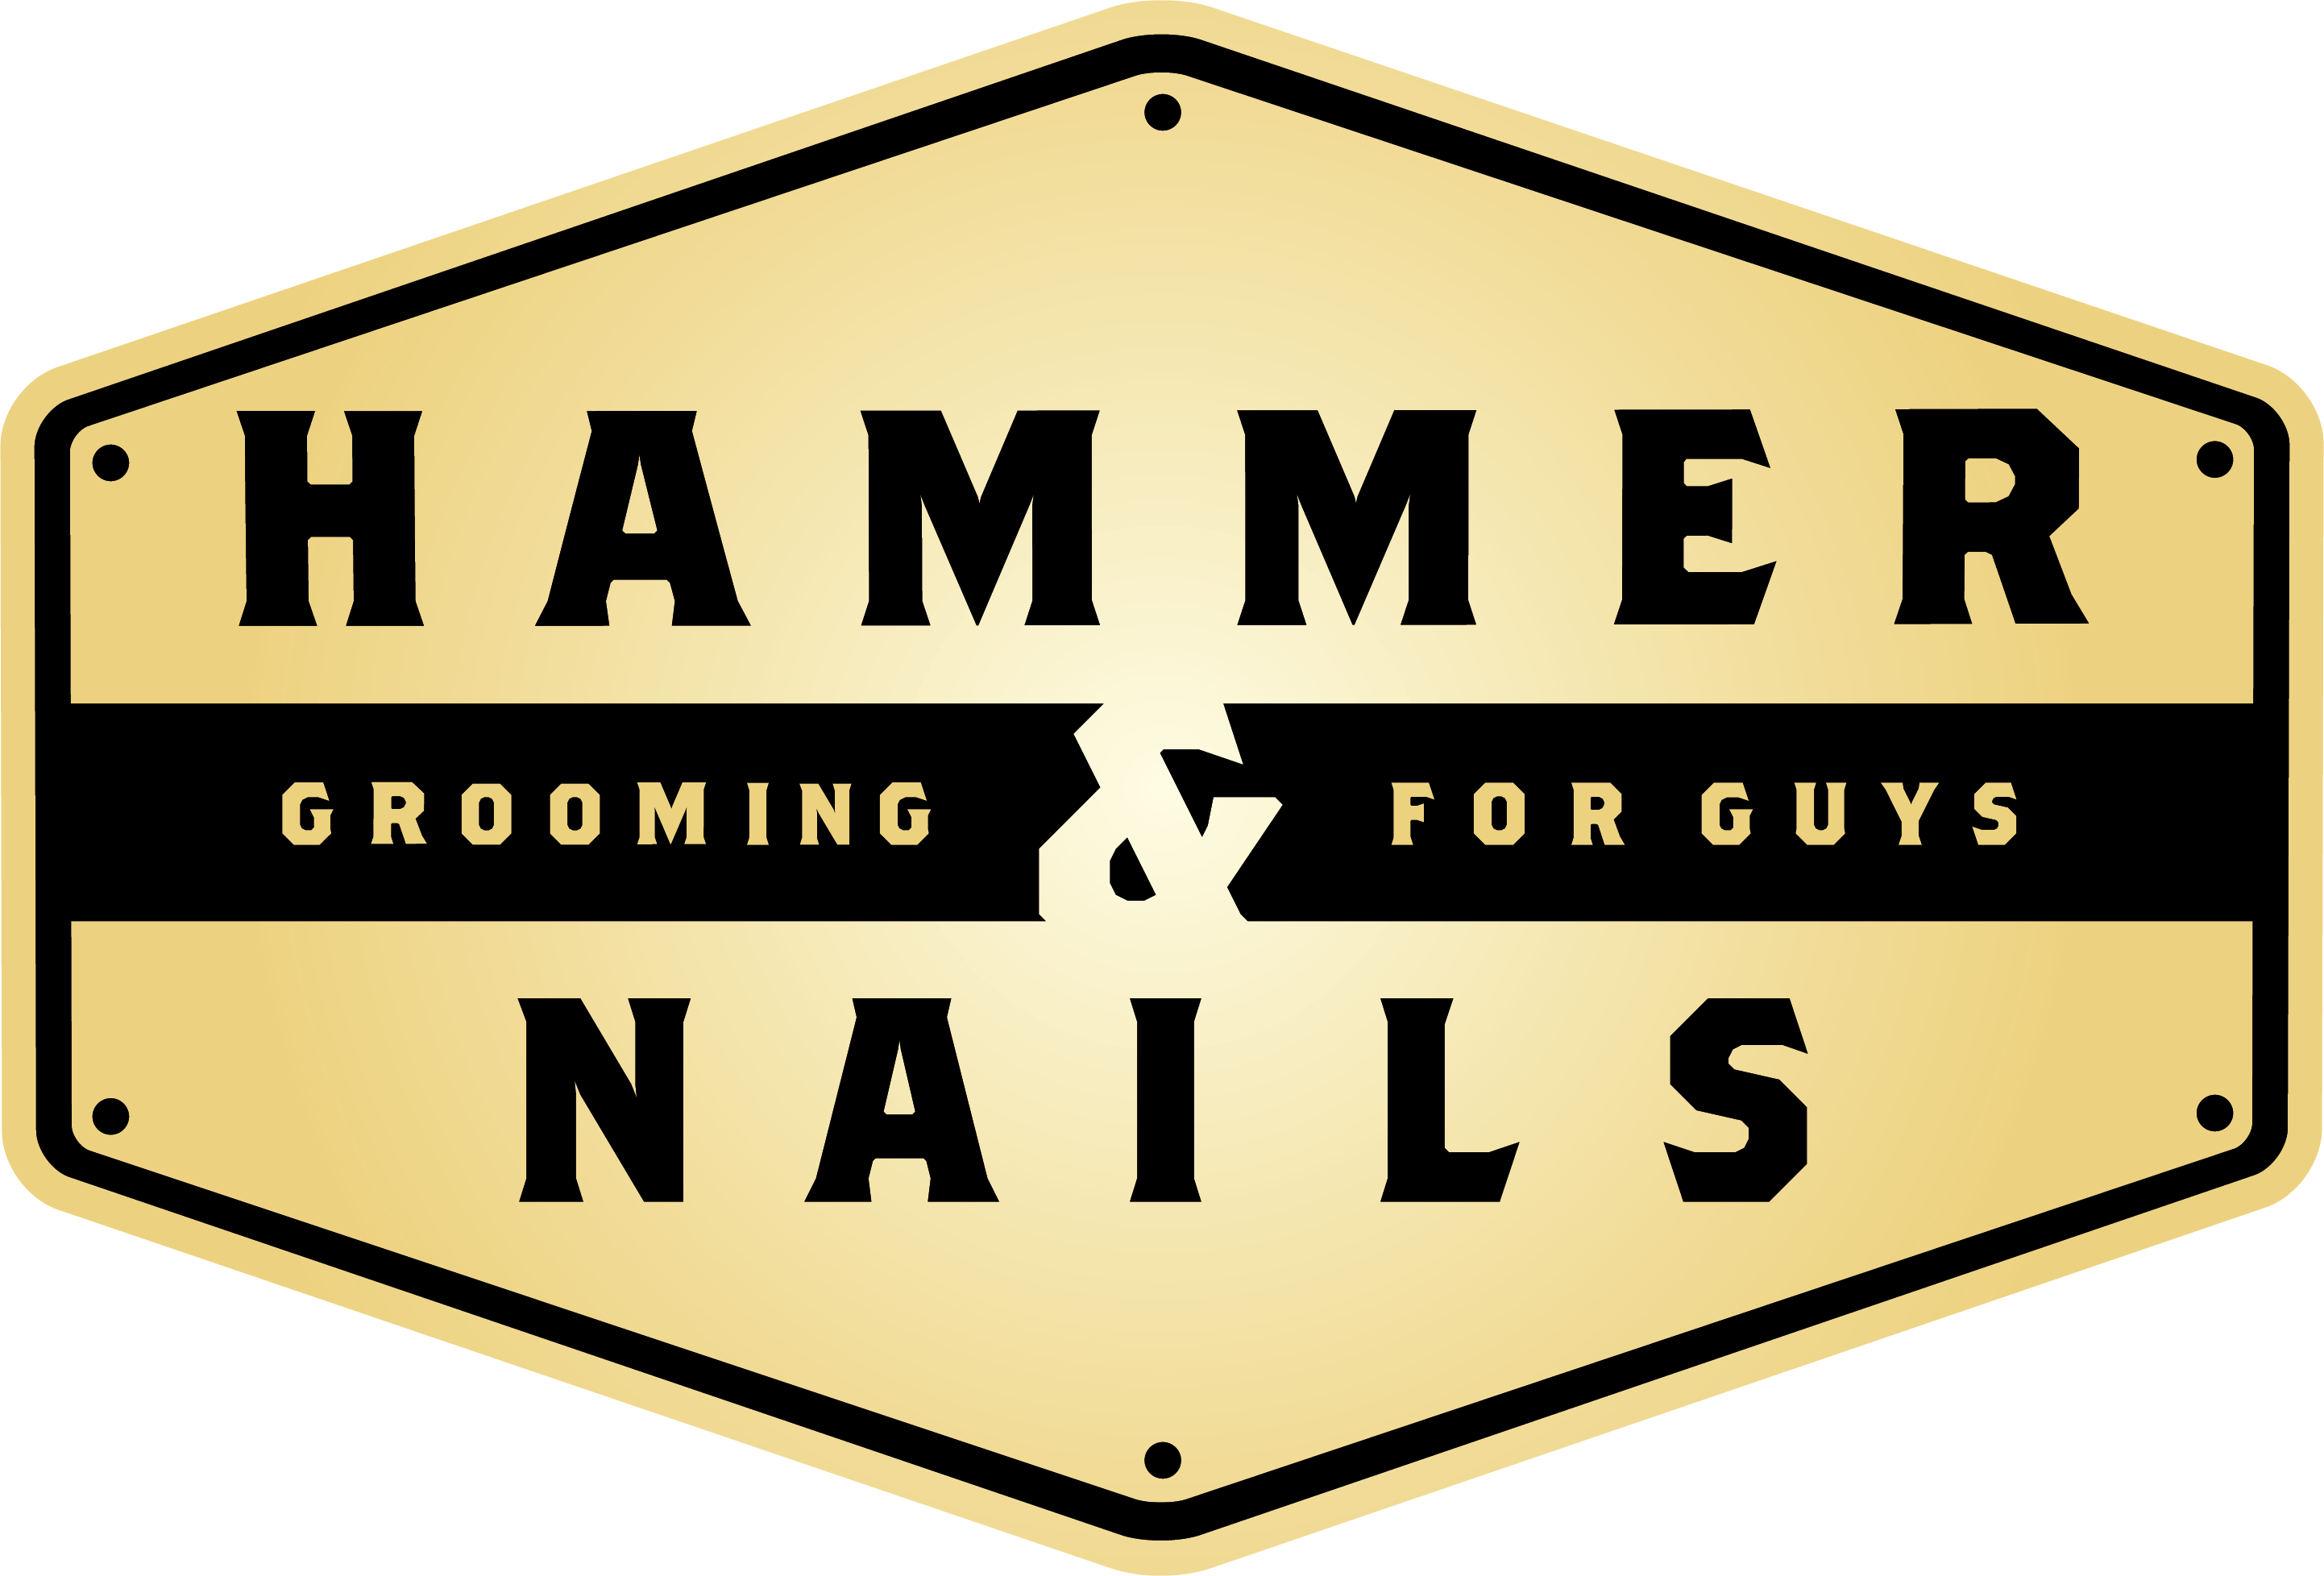  Hammer & Nails - Grooming Shop for Guys